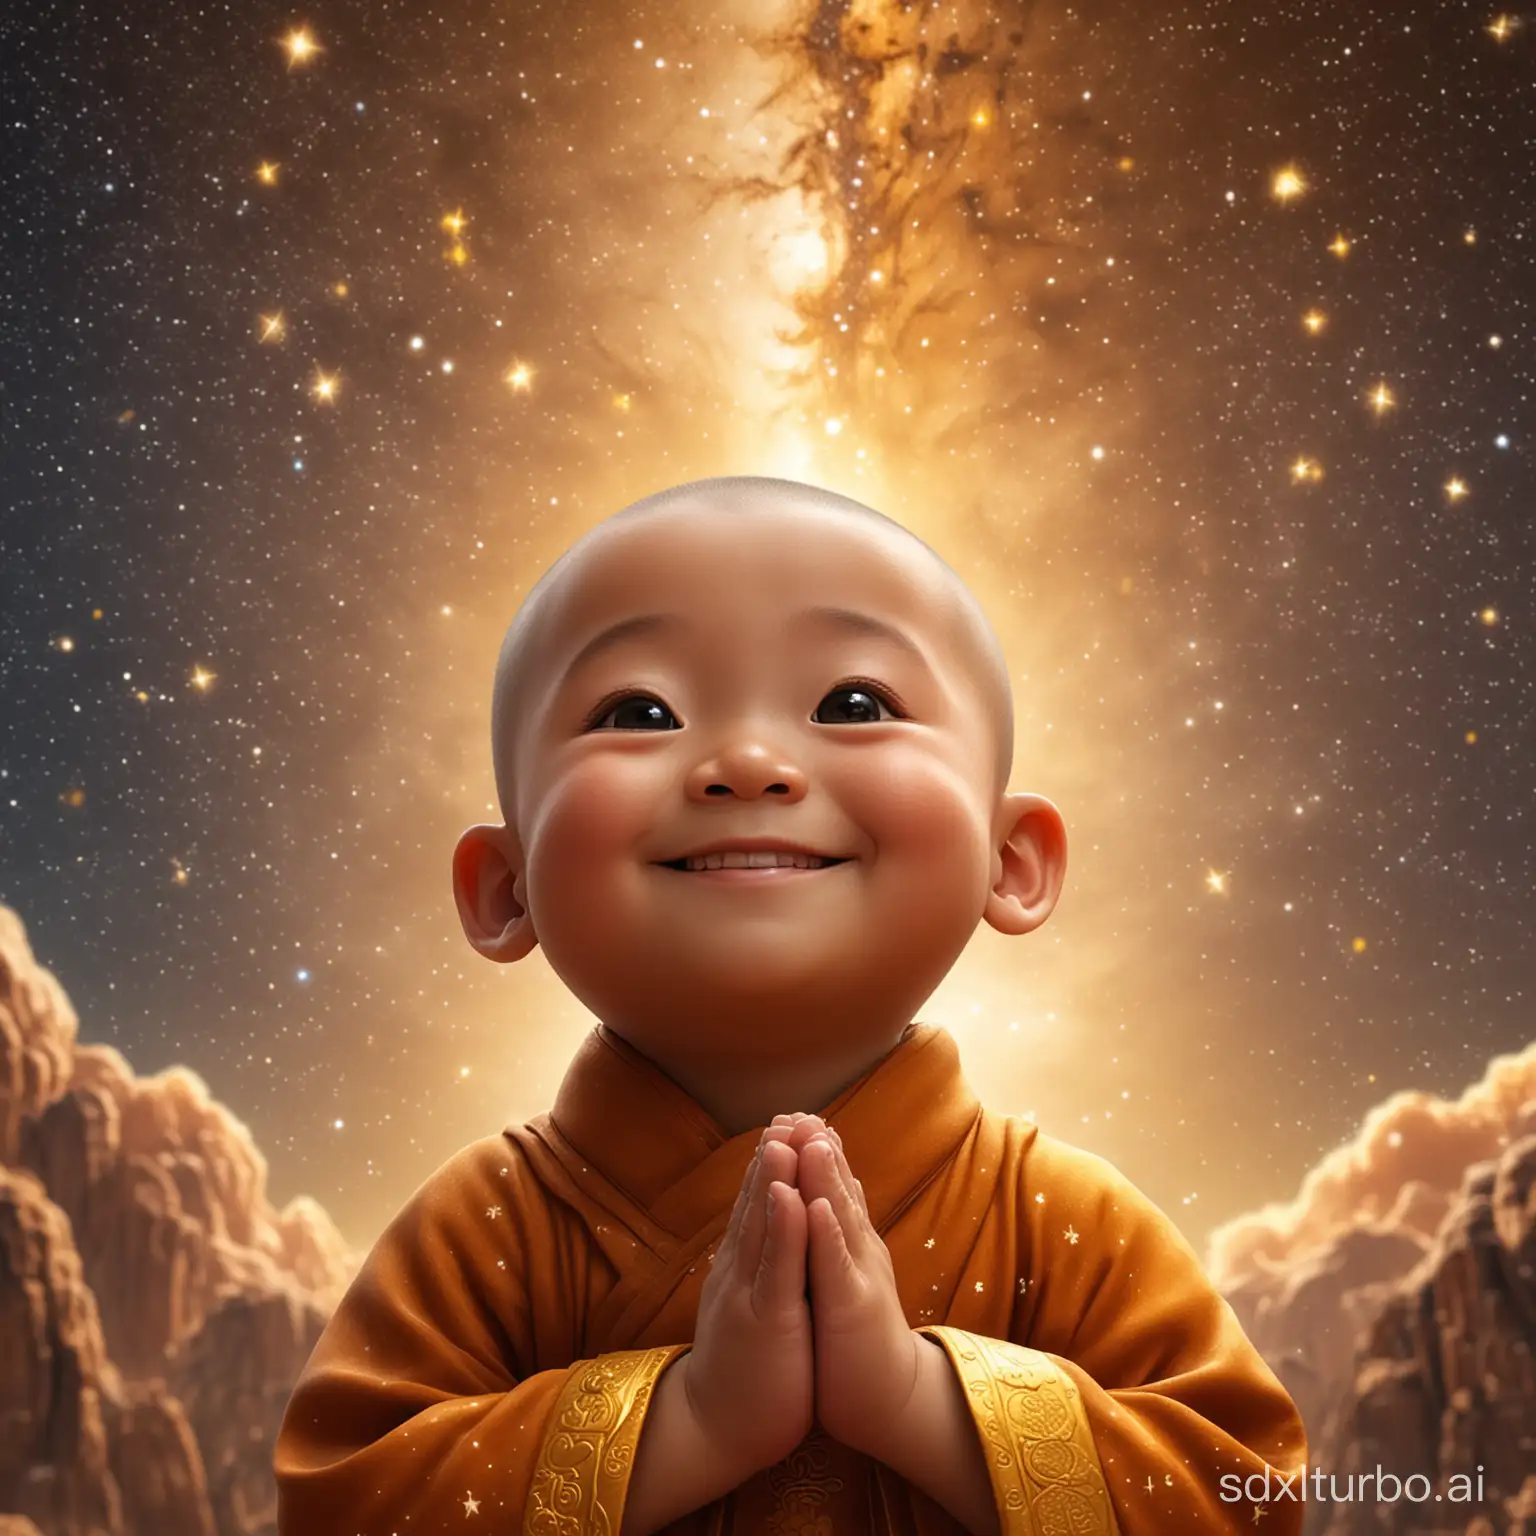 A smiling little Chinese monk looked up at the starry sky with his hands folded. The background was a golden starry sky, and the side portrait was close-up in 3D mode.